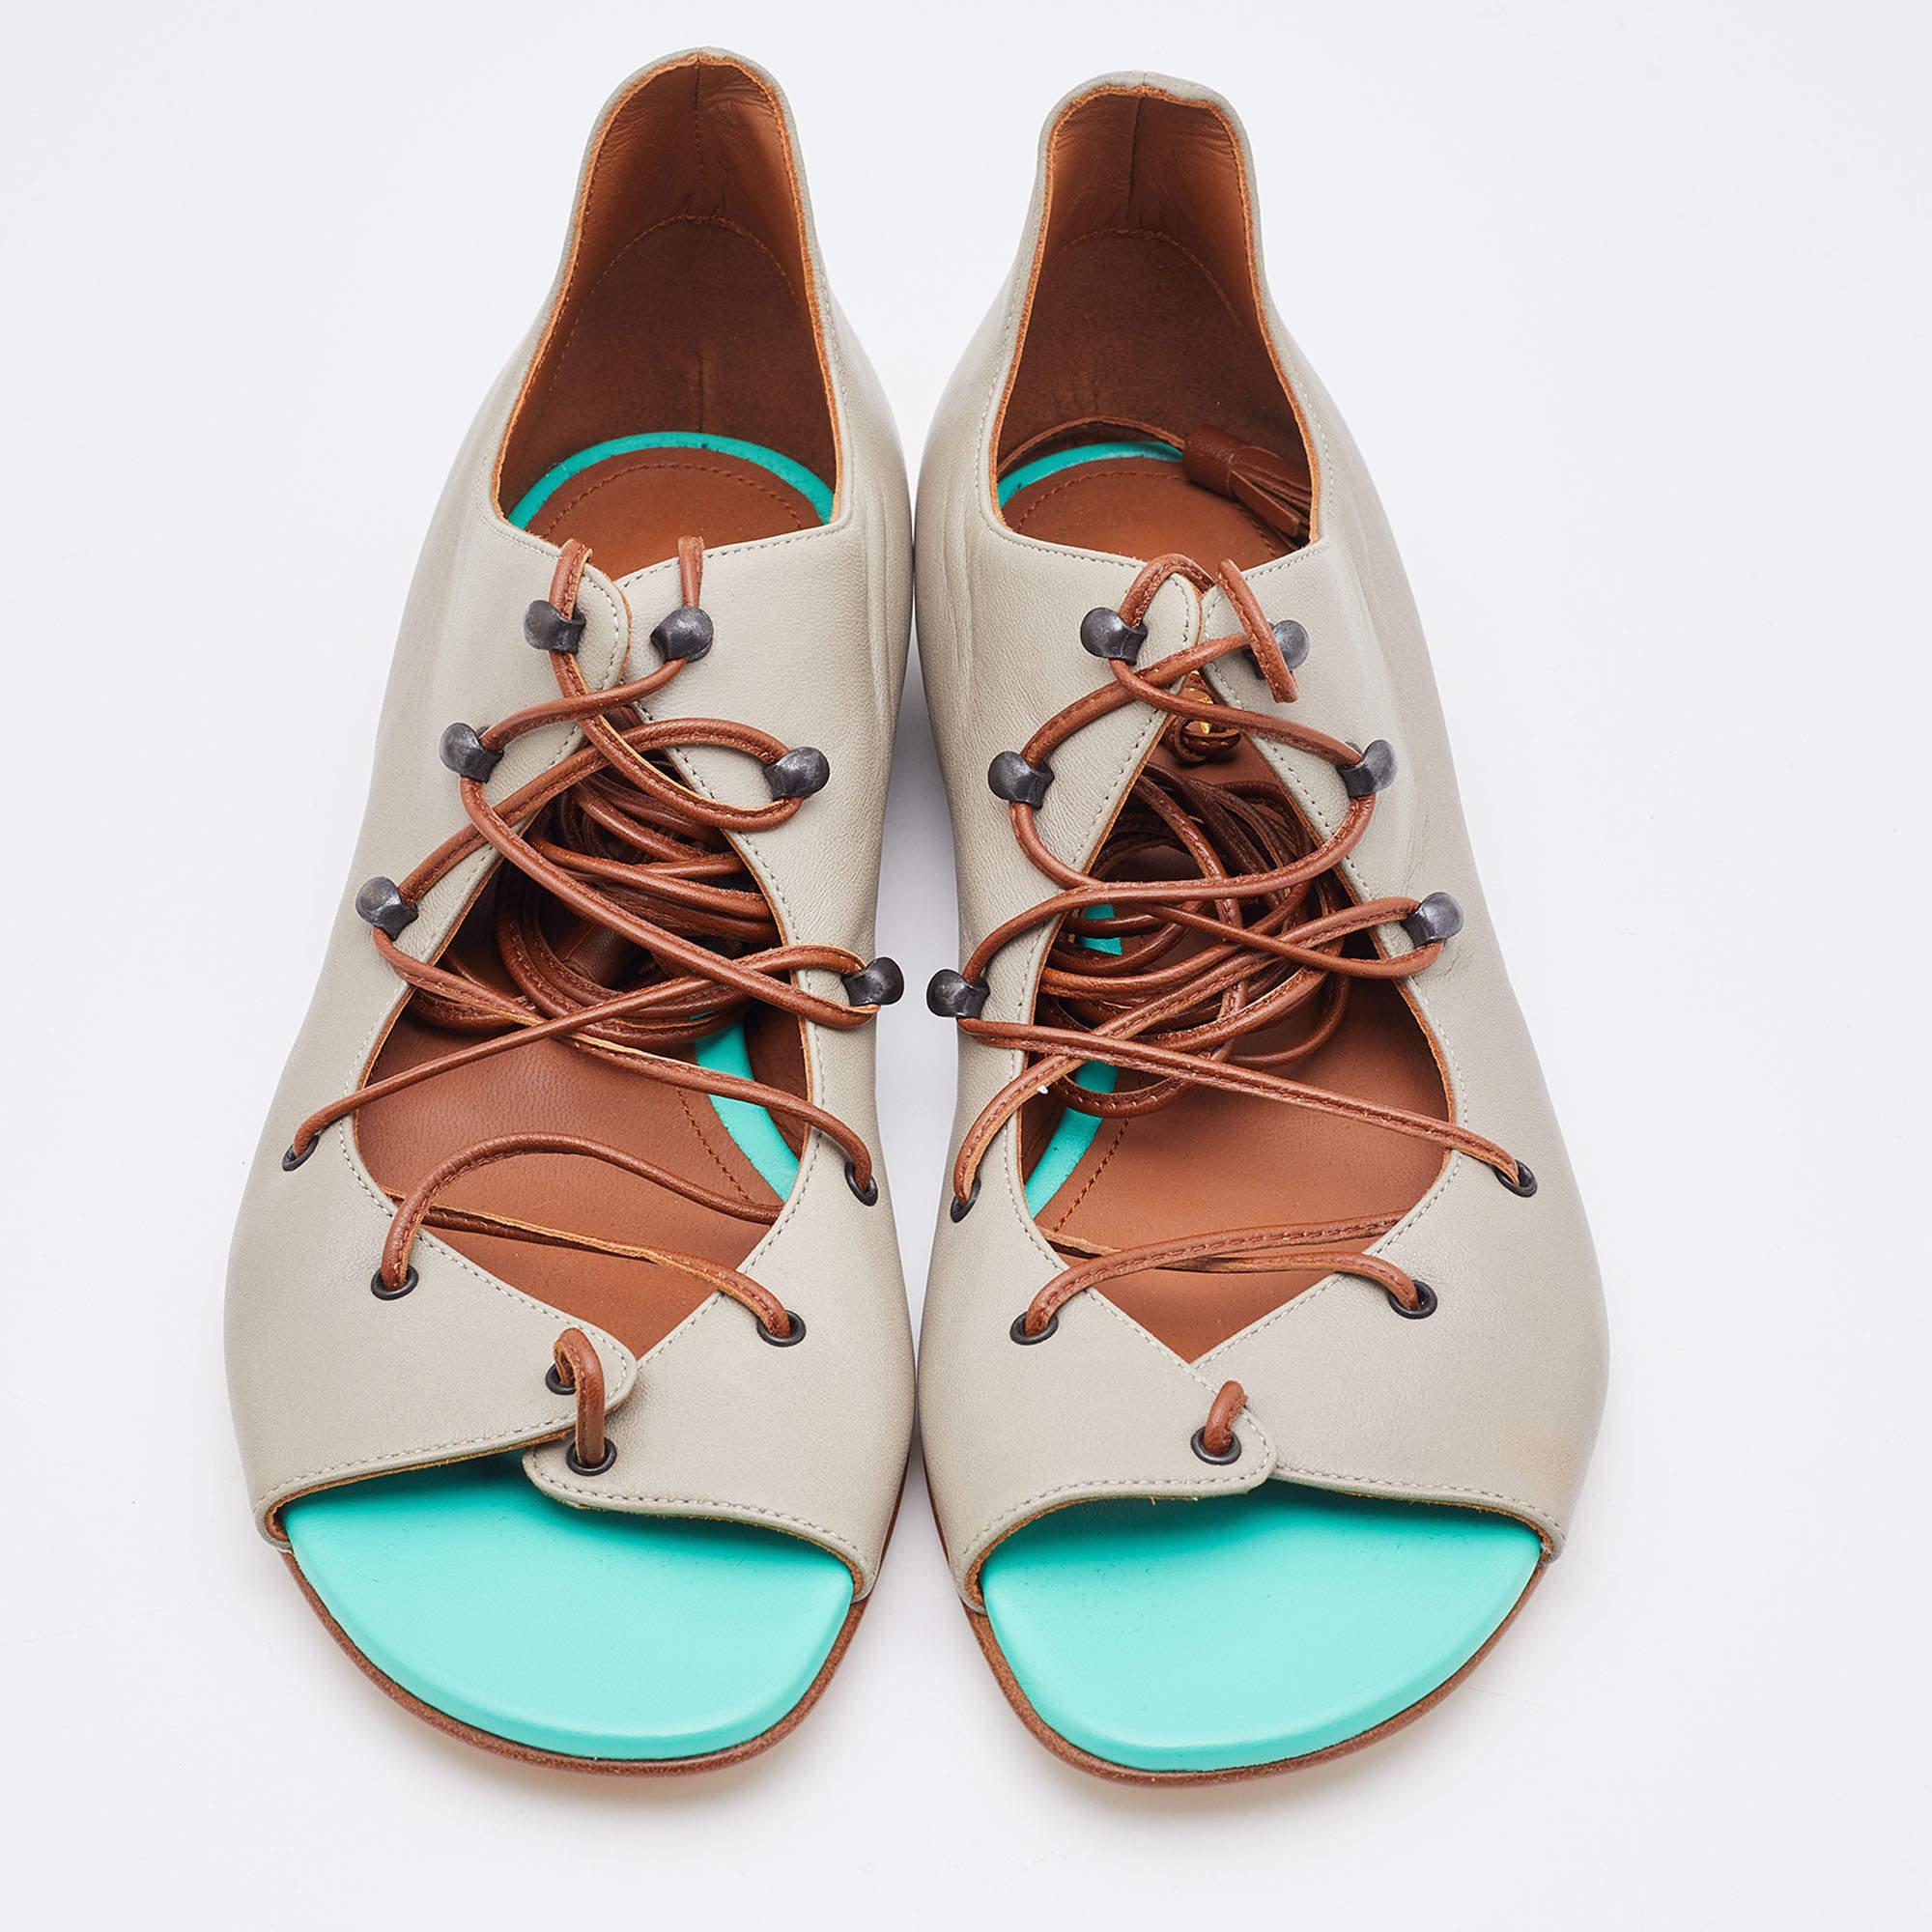 These well-crafted designer flats have got you covered for all-day plans. They come in a versatile design, and they look great on the feet.

Includes: Original Dustbag
